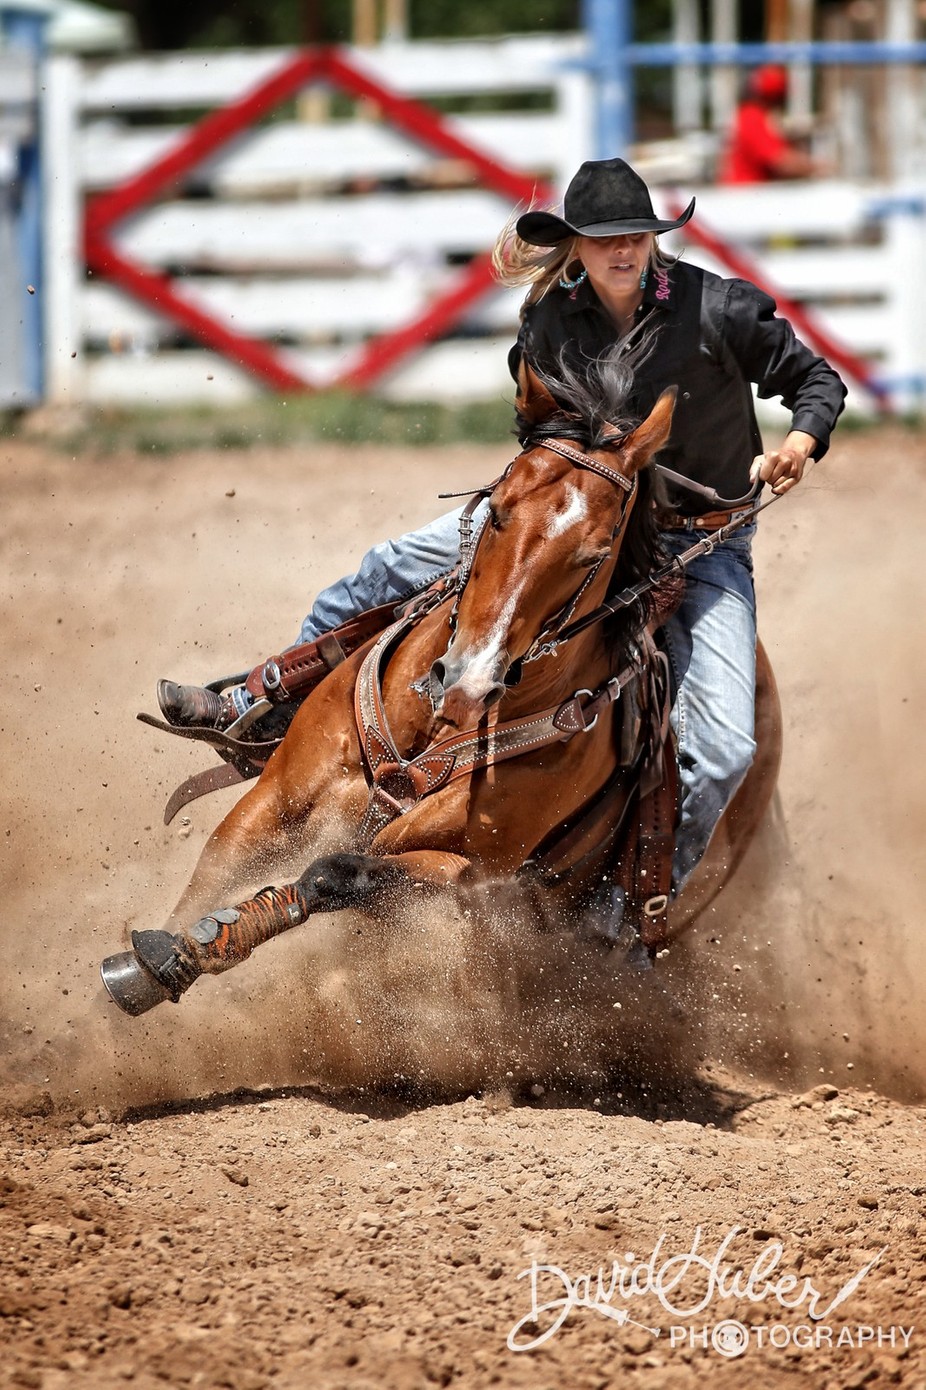 Sarah by davidhuber - At The Rodeo Photo Contest